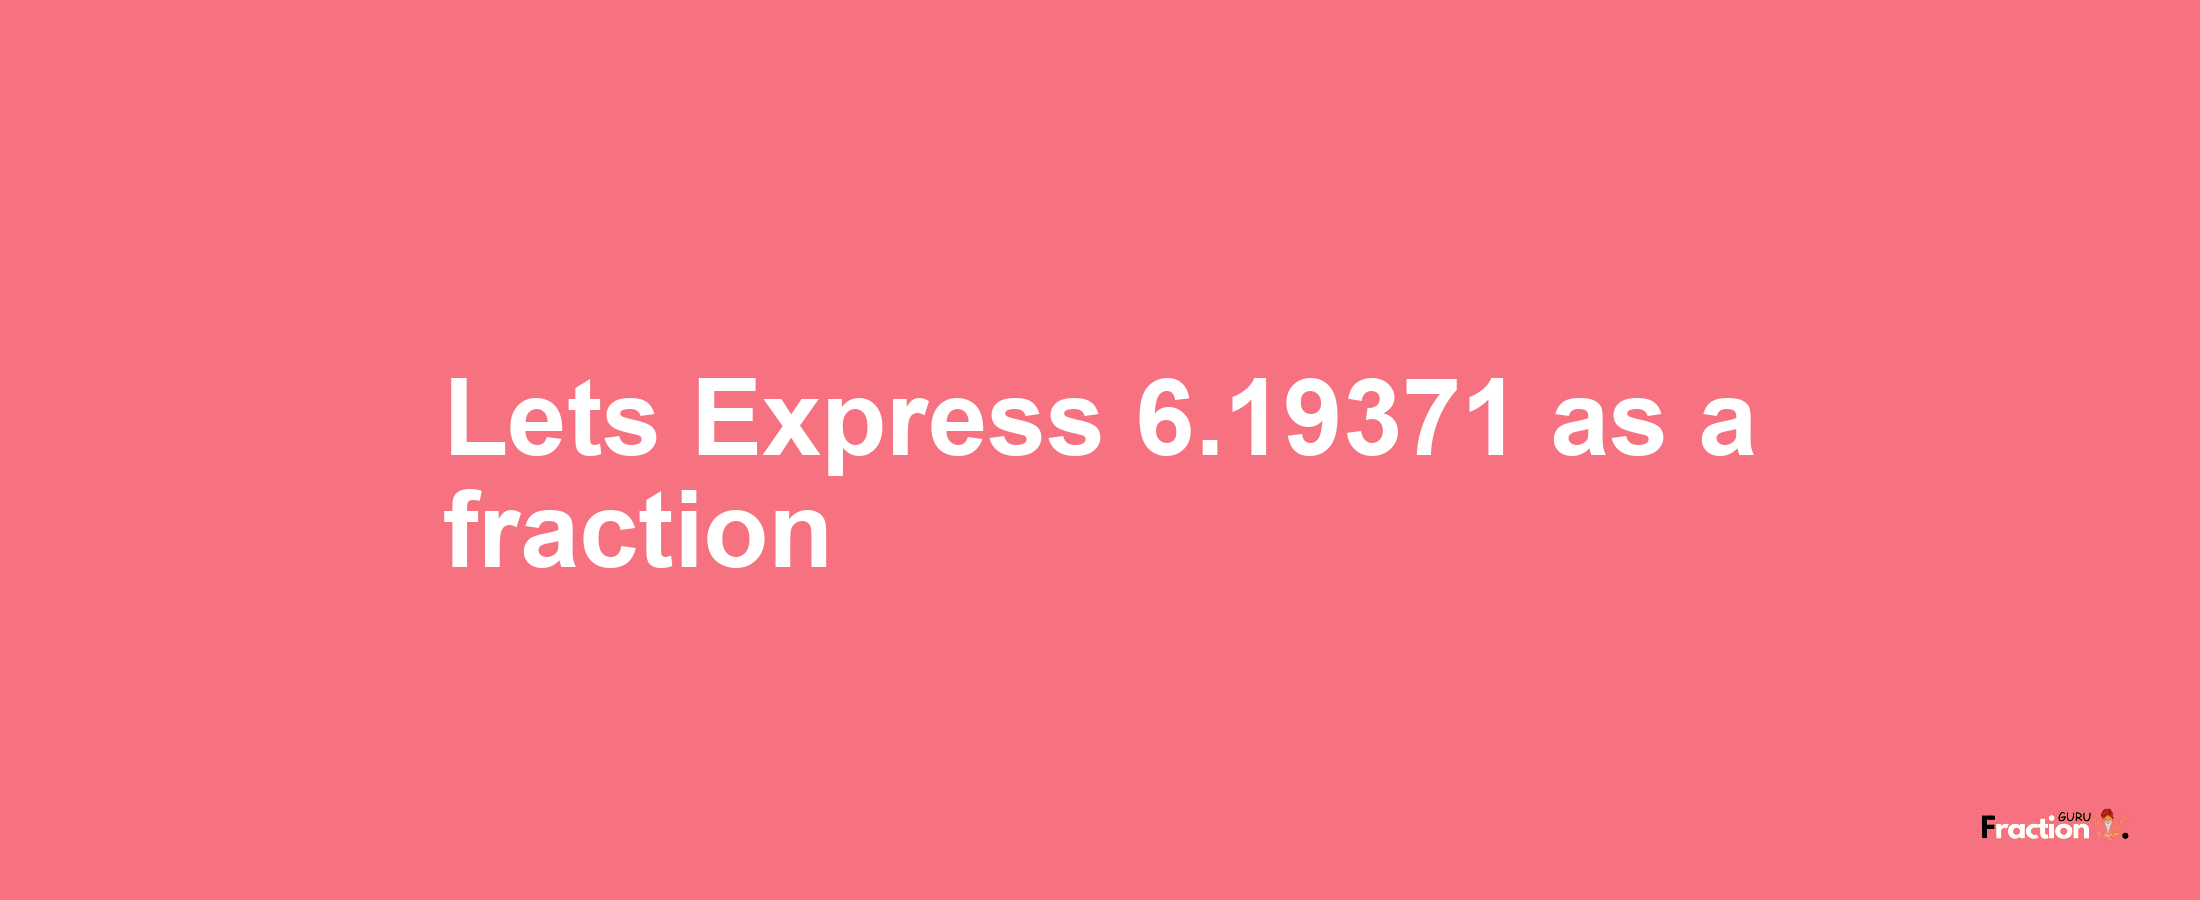 Lets Express 6.19371 as afraction